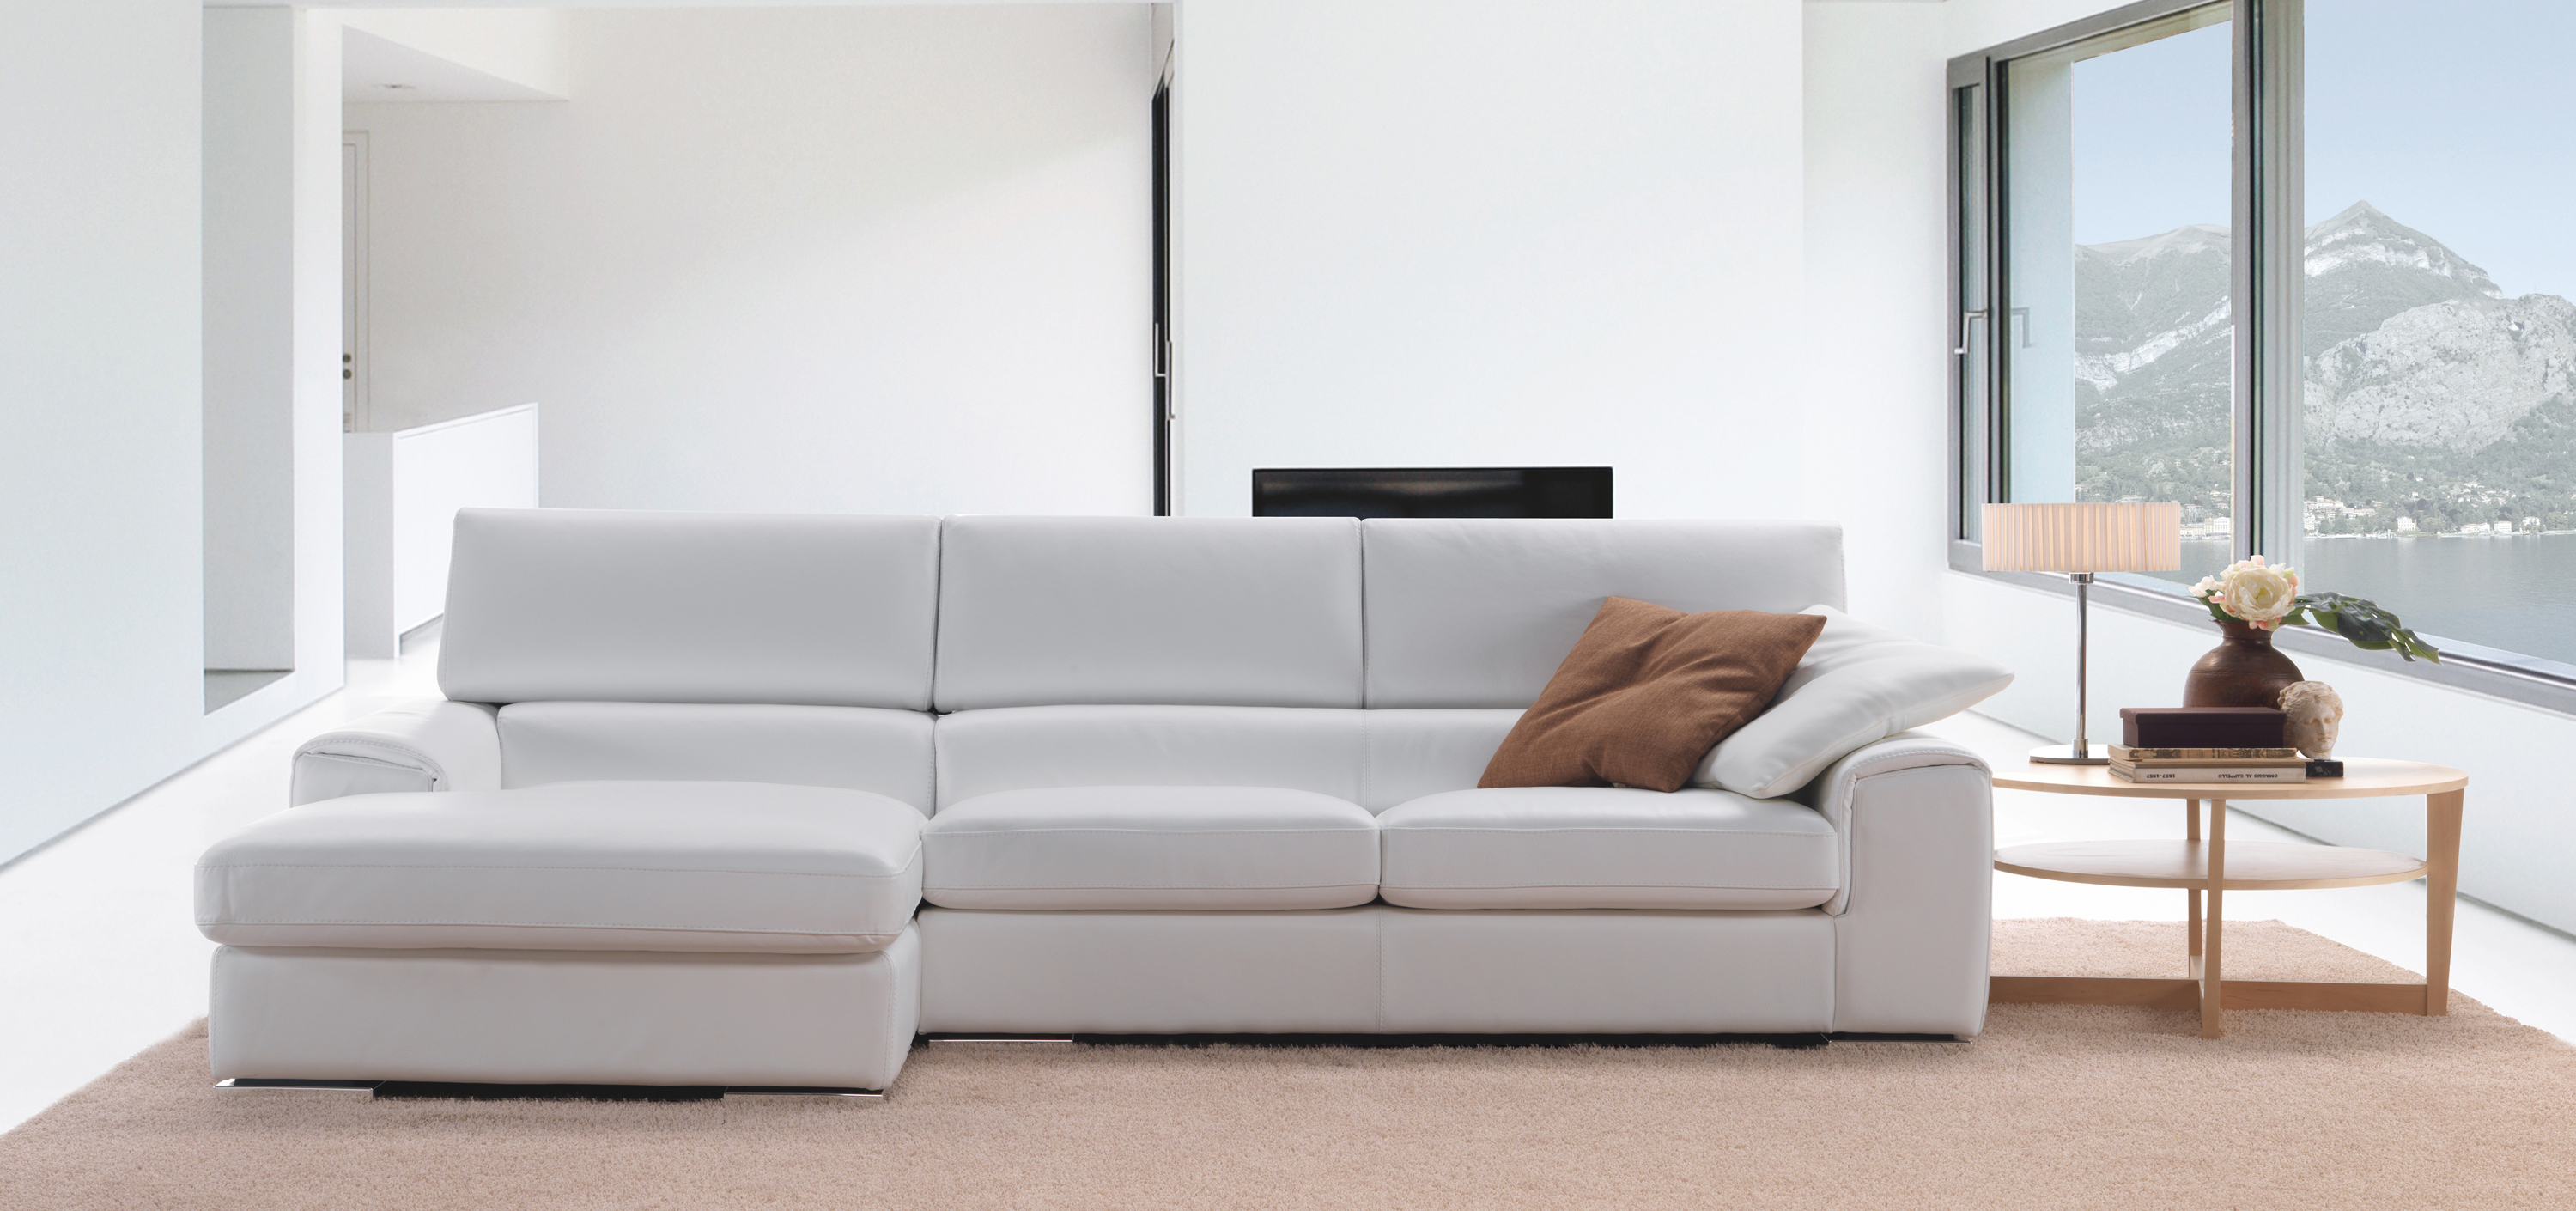 Sophisticated Full Italian Leather L-shape Furniture with Pillows - Click Image to Close